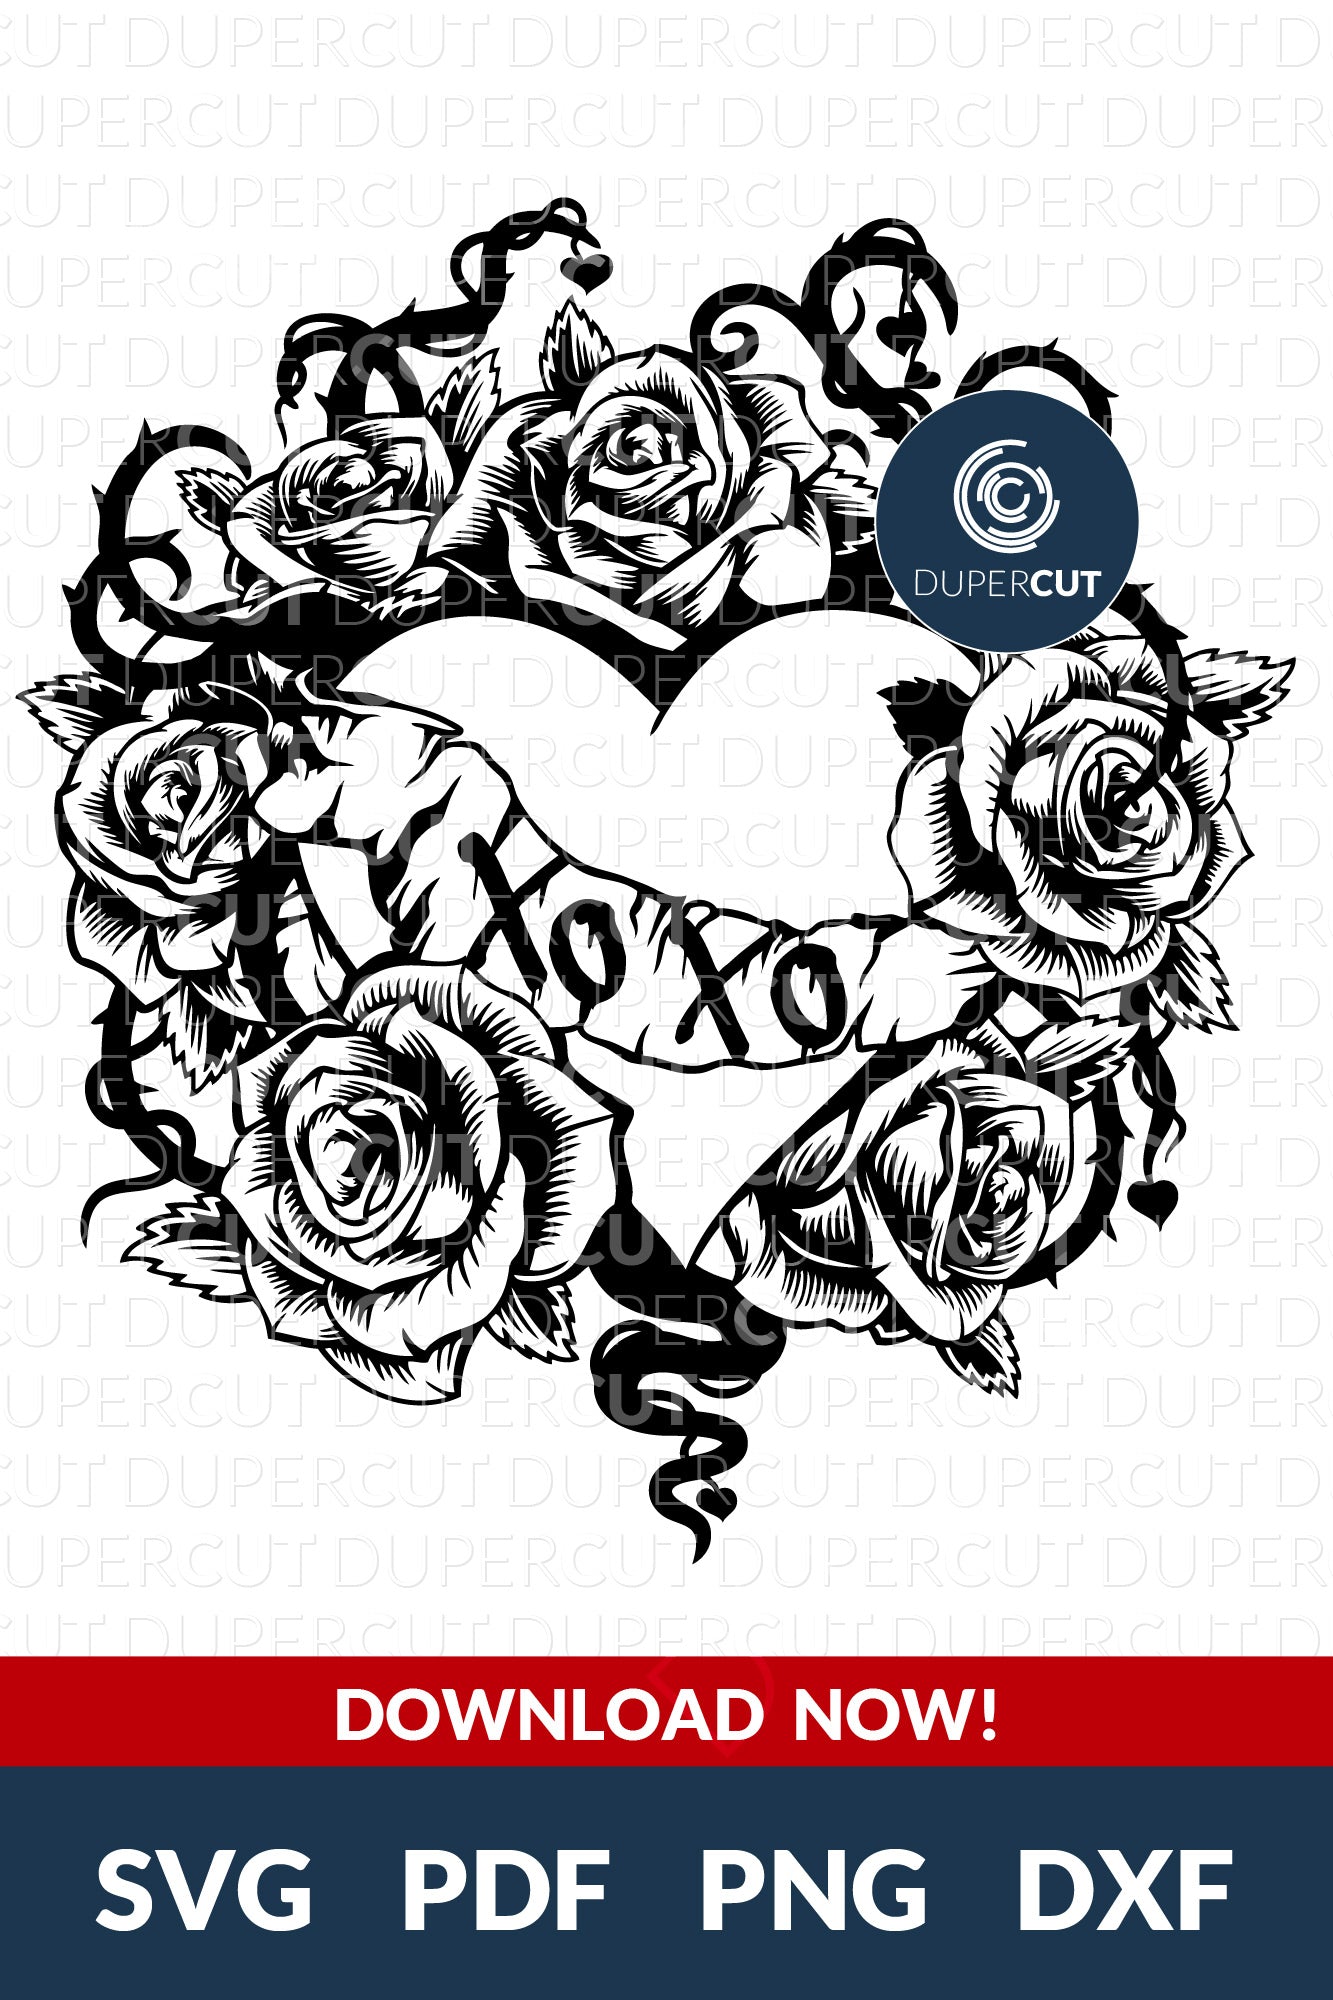 Black tattoo illustration, detailed heart with roses, alternative style Papercutting template for commercial use. SVG files for Silhouette Cameo, Cricut, Glowforge, DXF for CNC, laser cutting, print on demand